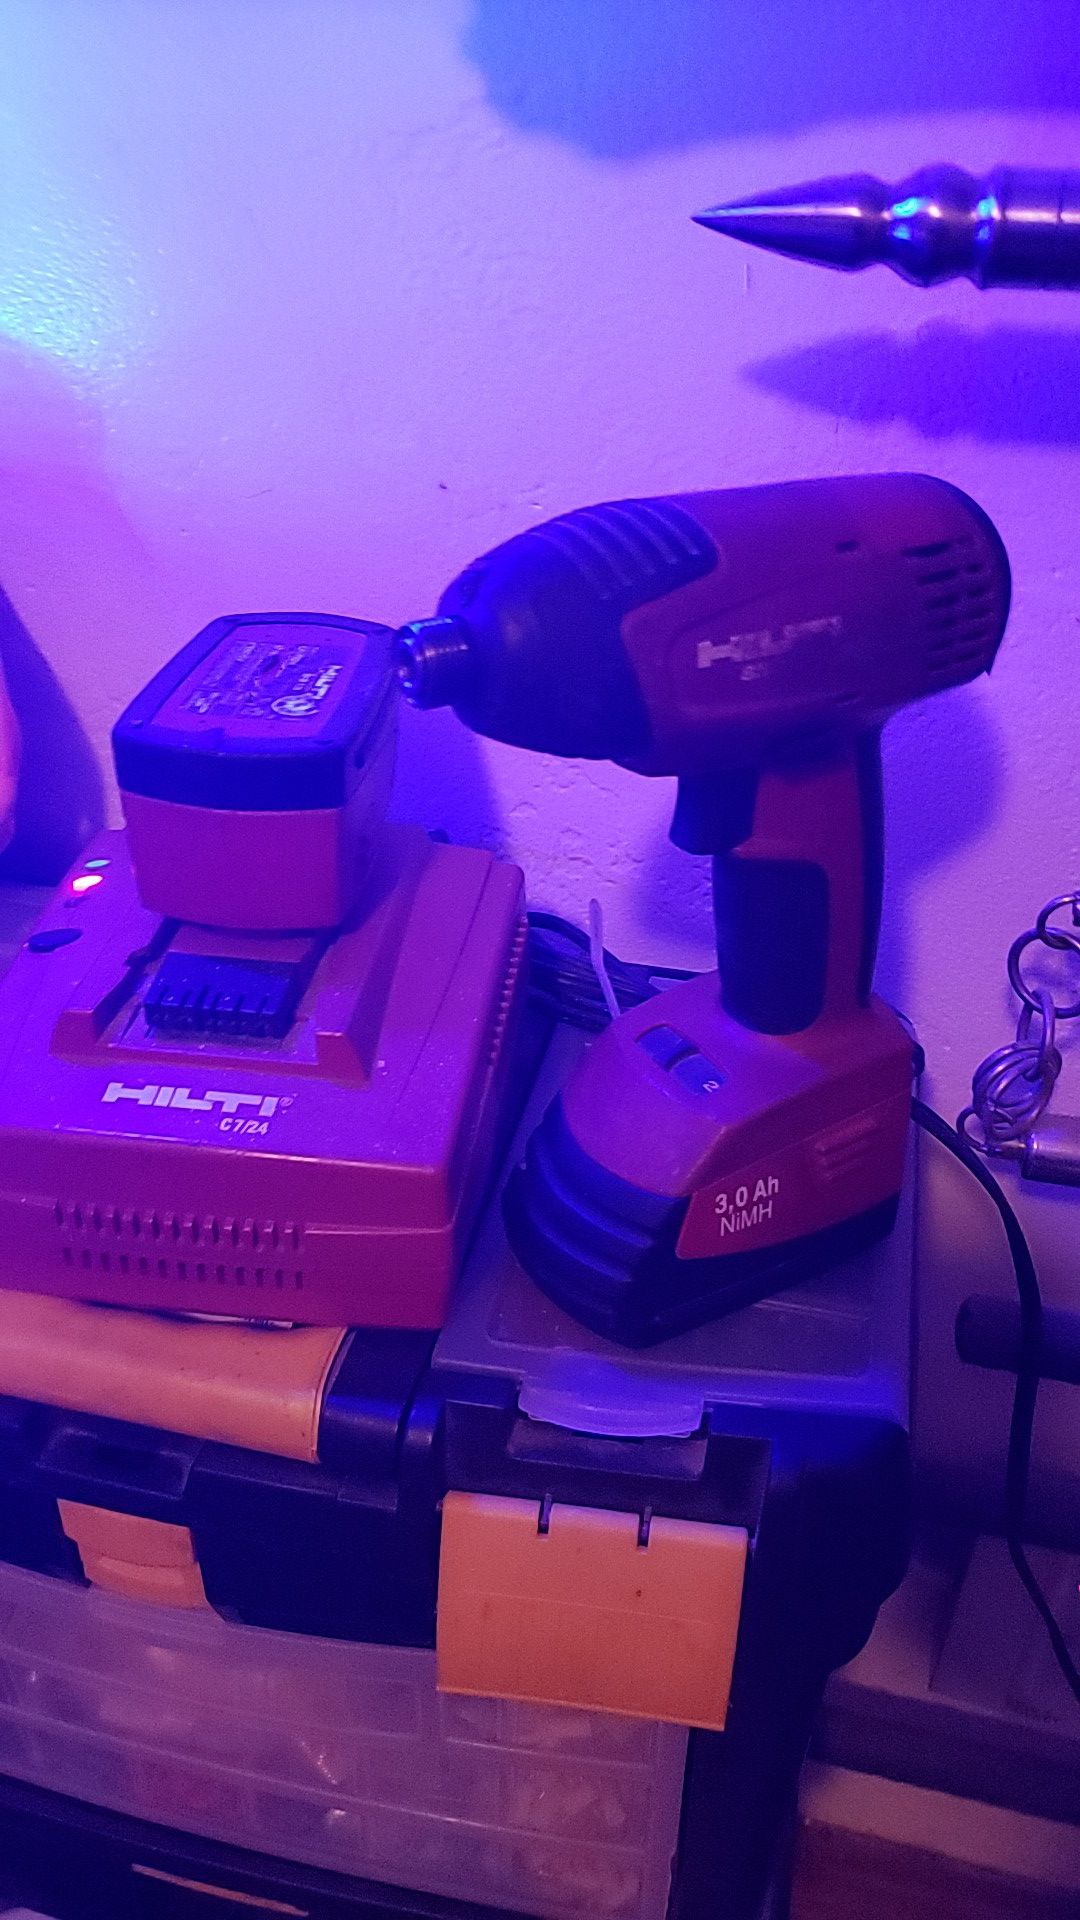 HILTI IMPACT DRILL 2 BATTERIES AND CHARGER